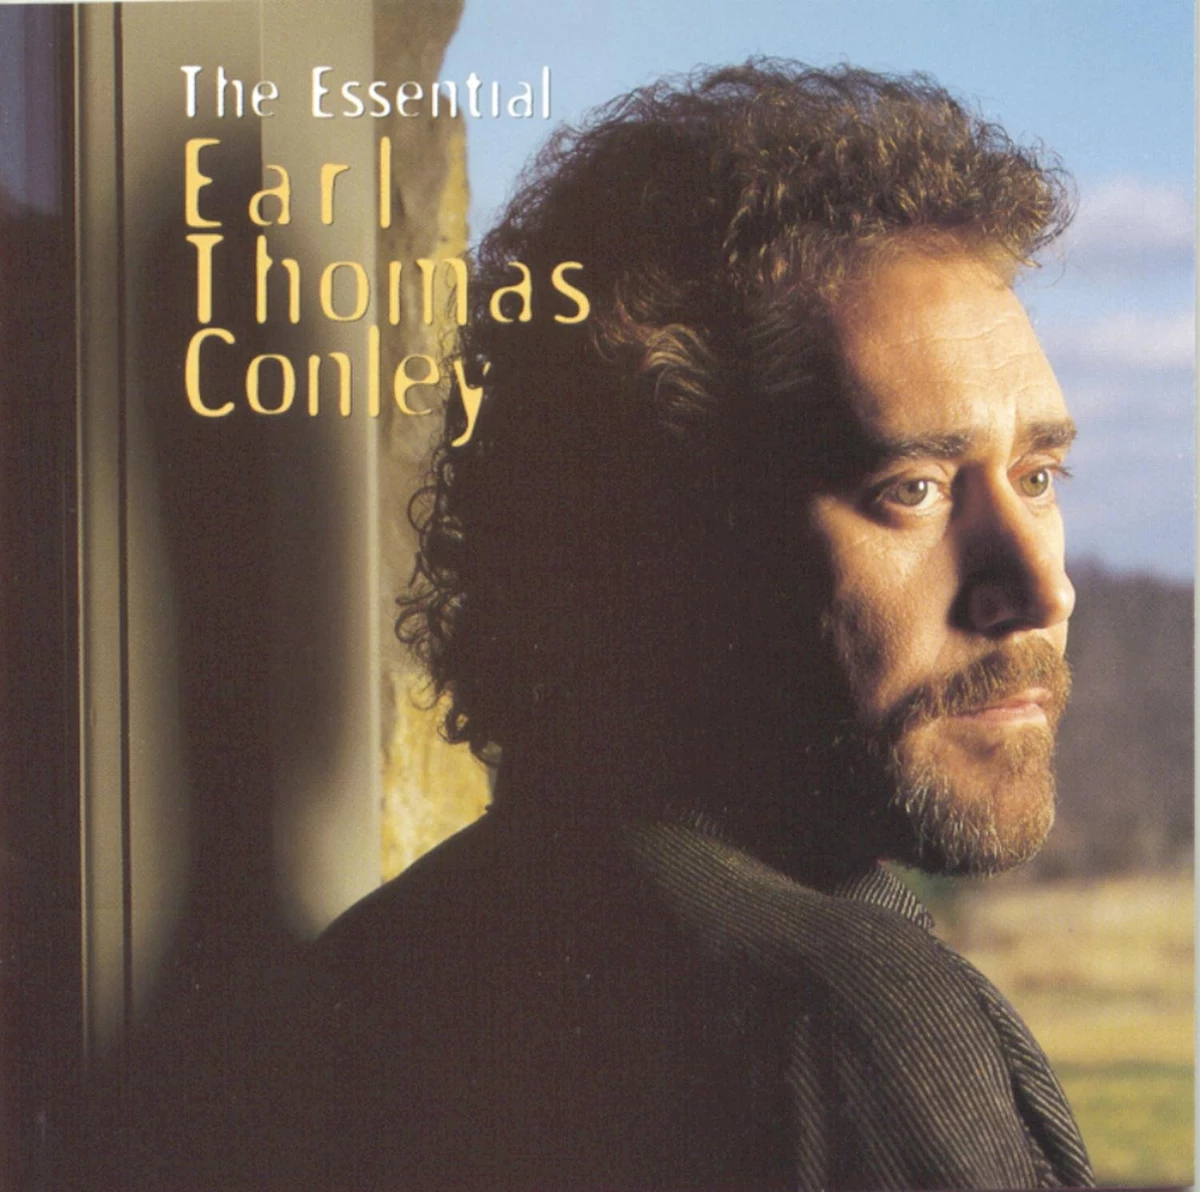 Whatever Happened To '80's Superstar Earl Thomas Conley?